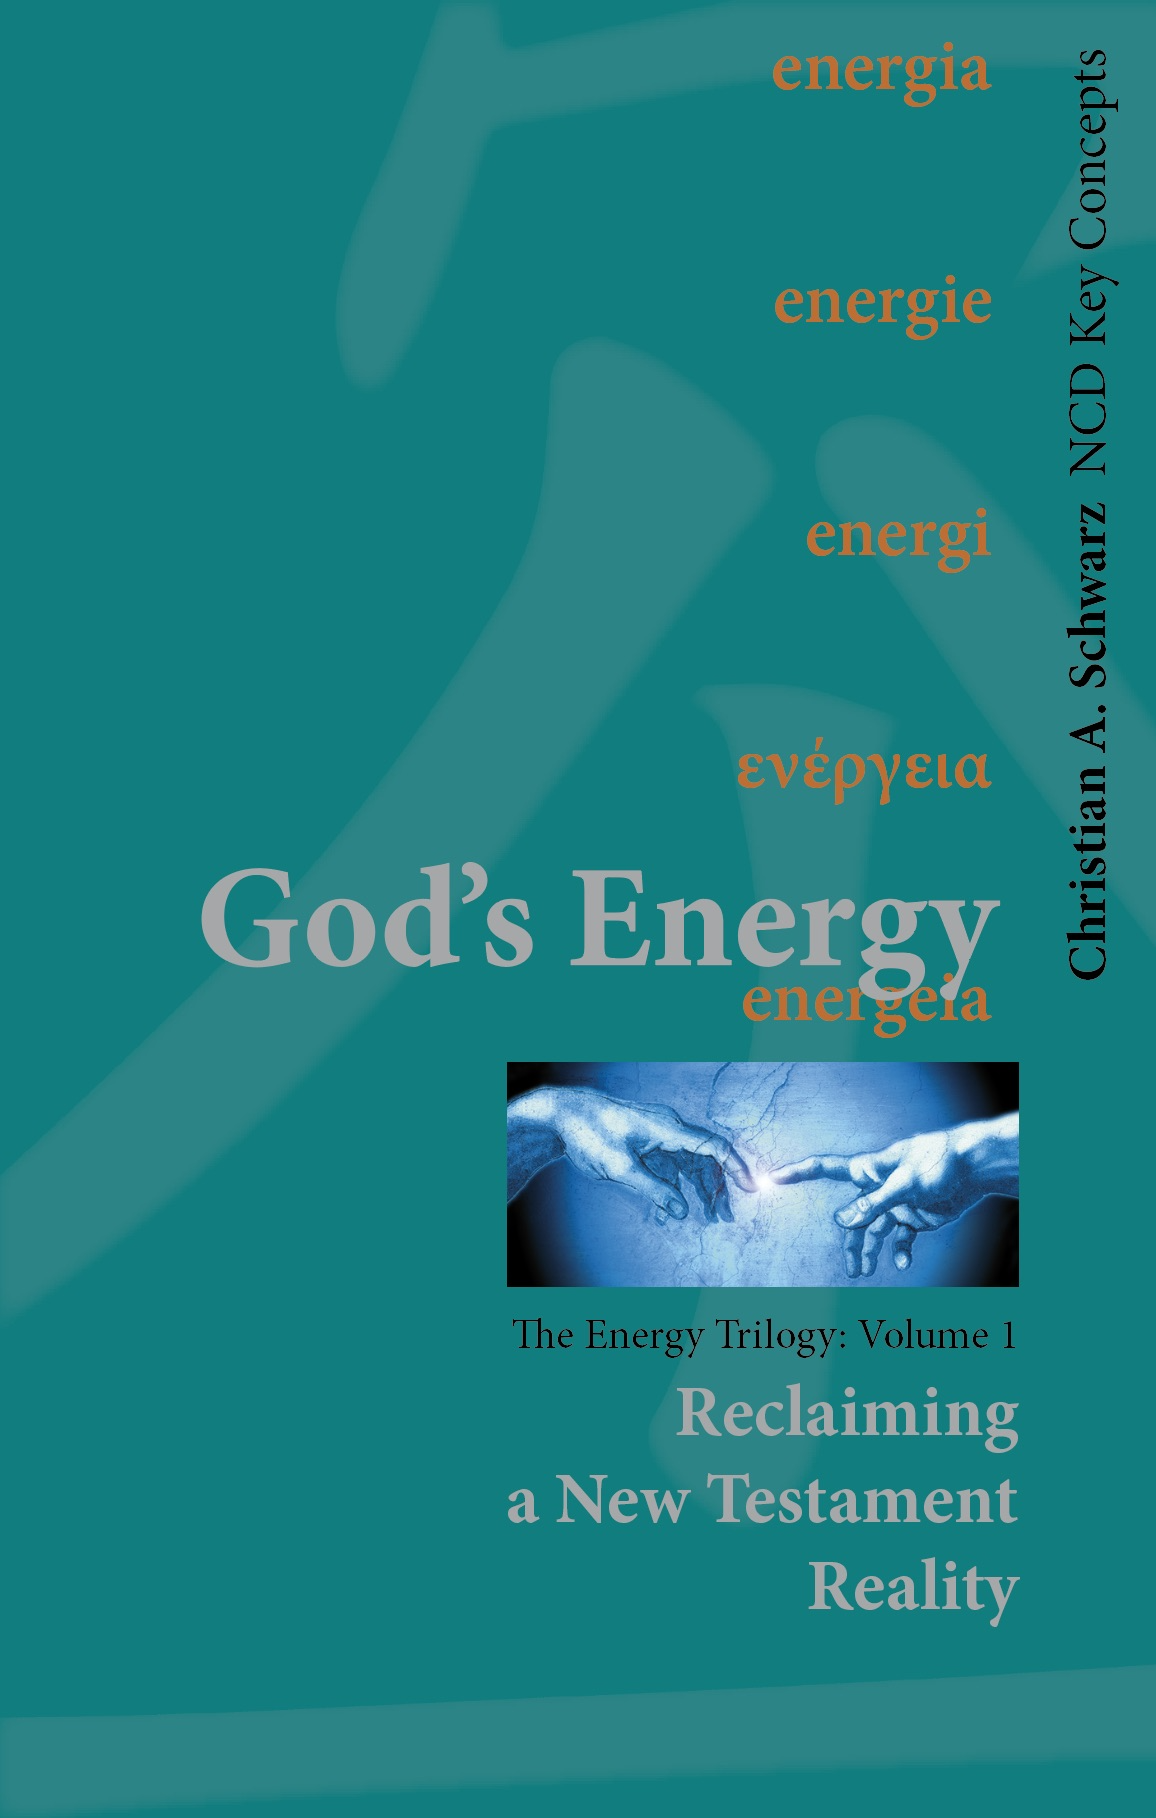 God’s Energy book cover